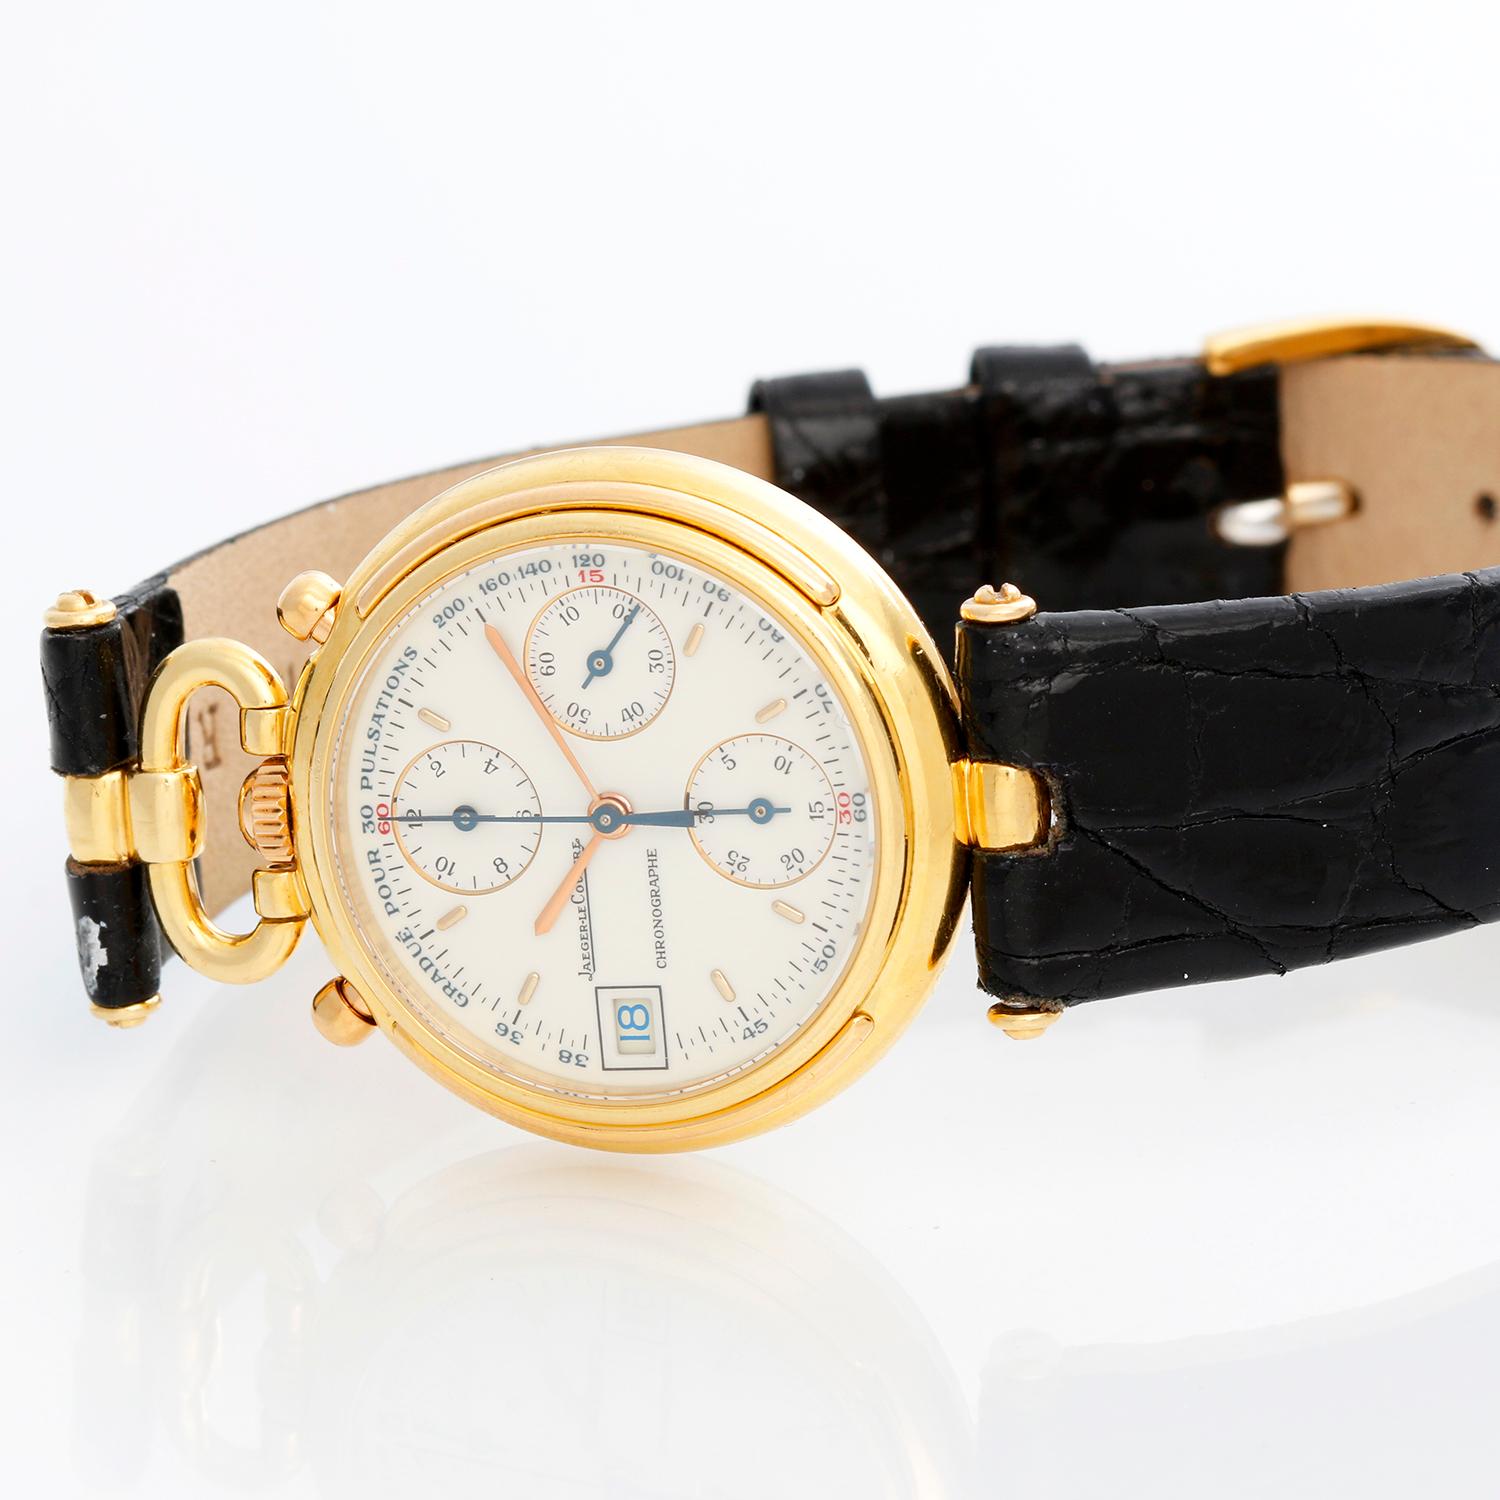 Jaeger-LeCoultre Vintage 18K Yellow Gold Odysseus Chronograph 411.7.31 - Quartz. 18K Yellow Gold ( 30 mm ). Enamel Dial with 3 sub dials ; Chronograph Registers And Constant Seconds Sub dials, Date Aperture, Minutes And Pulsometer Outer Rings. Black